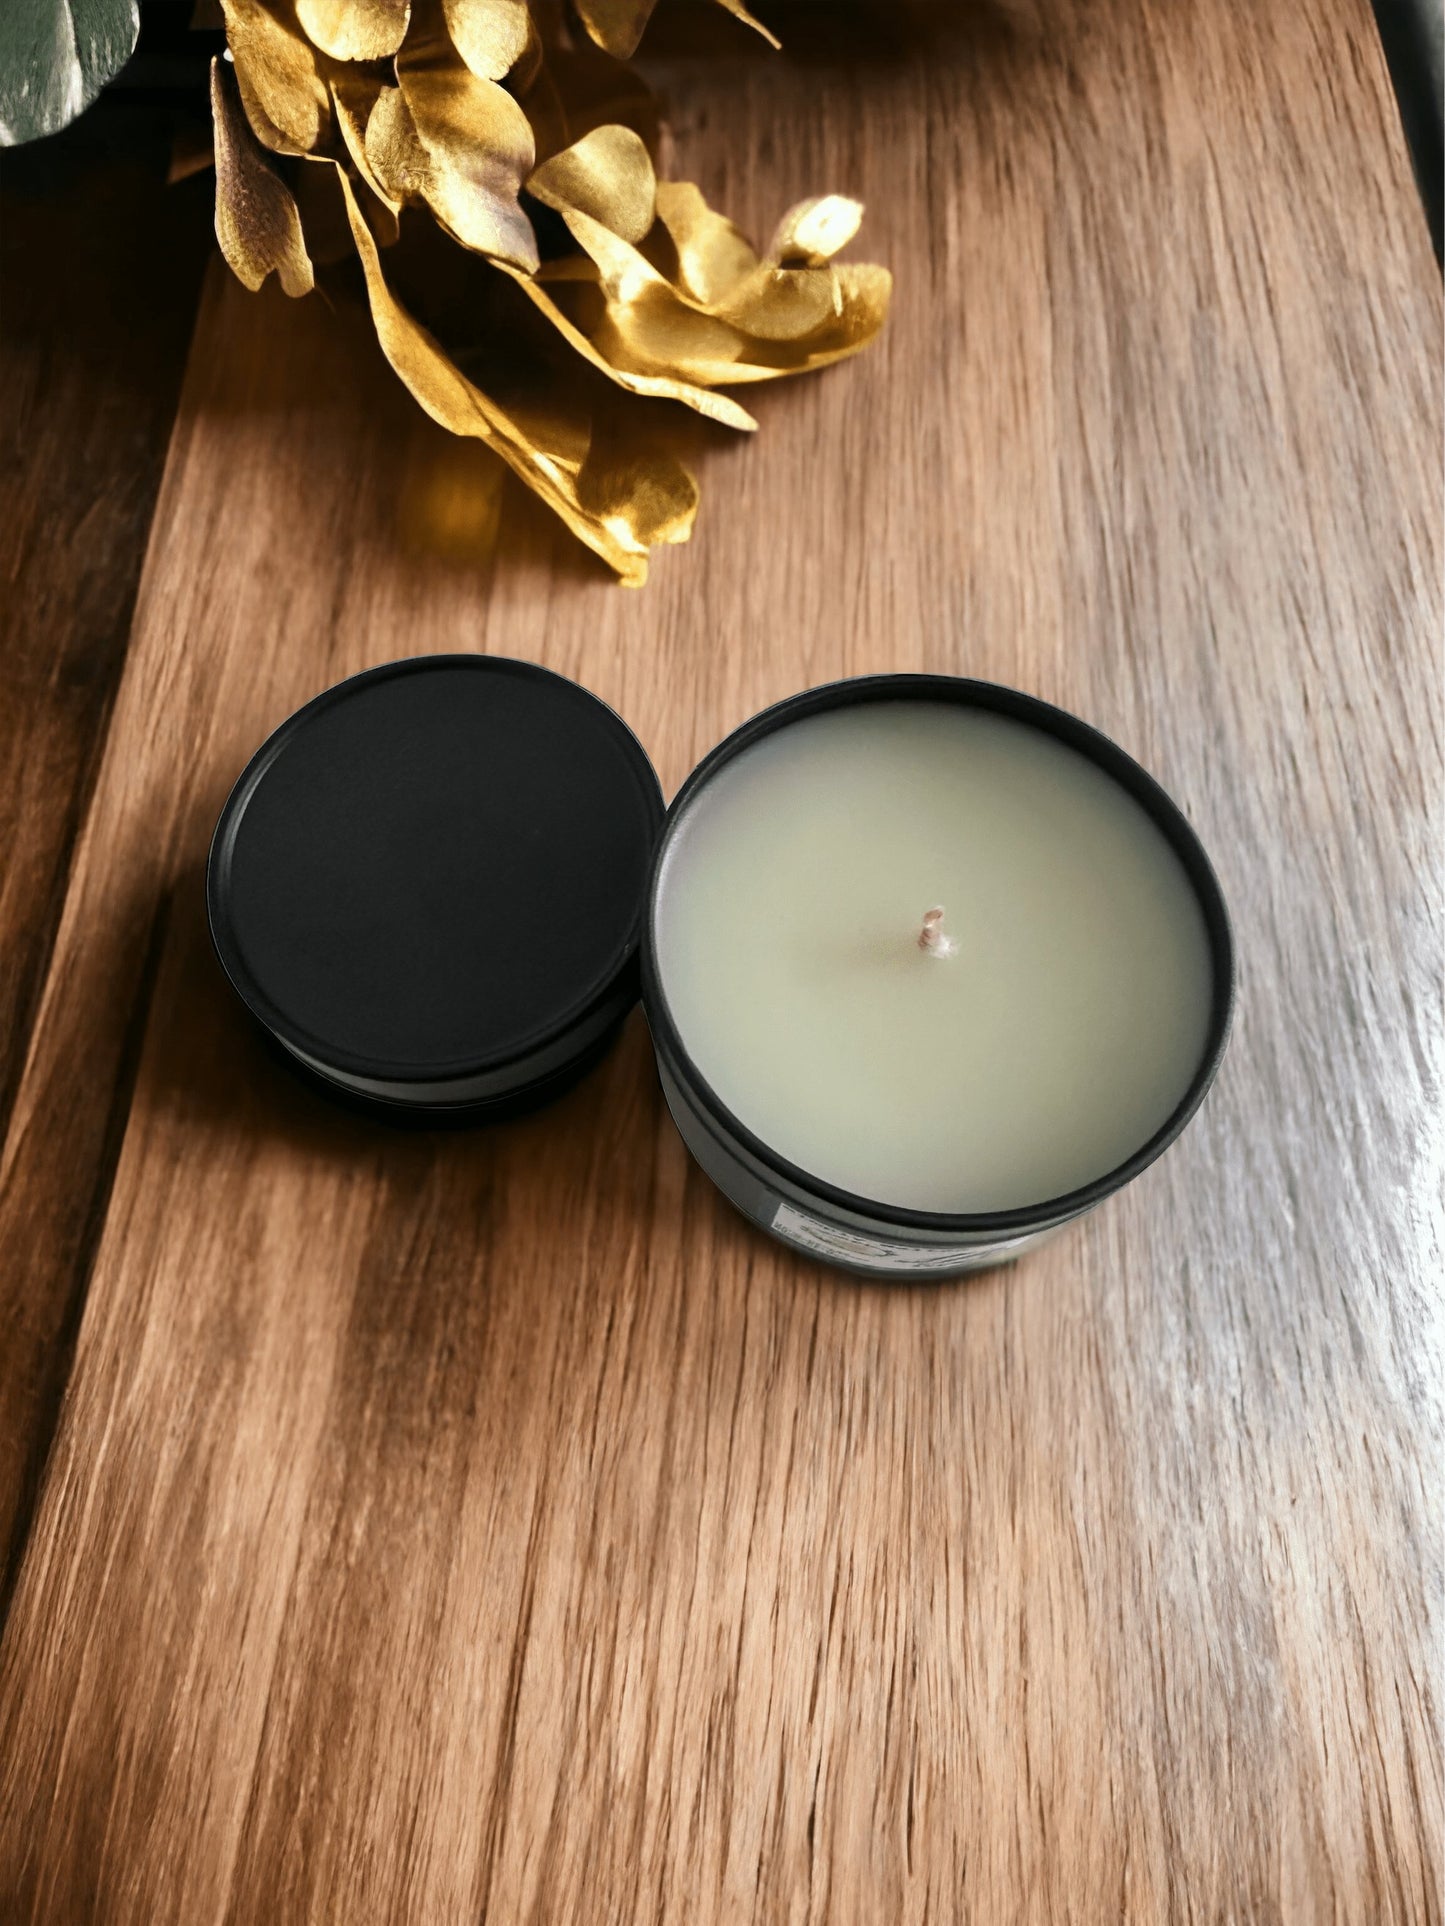 Lemongrass & Ginger Tin Candle - Simply Melted